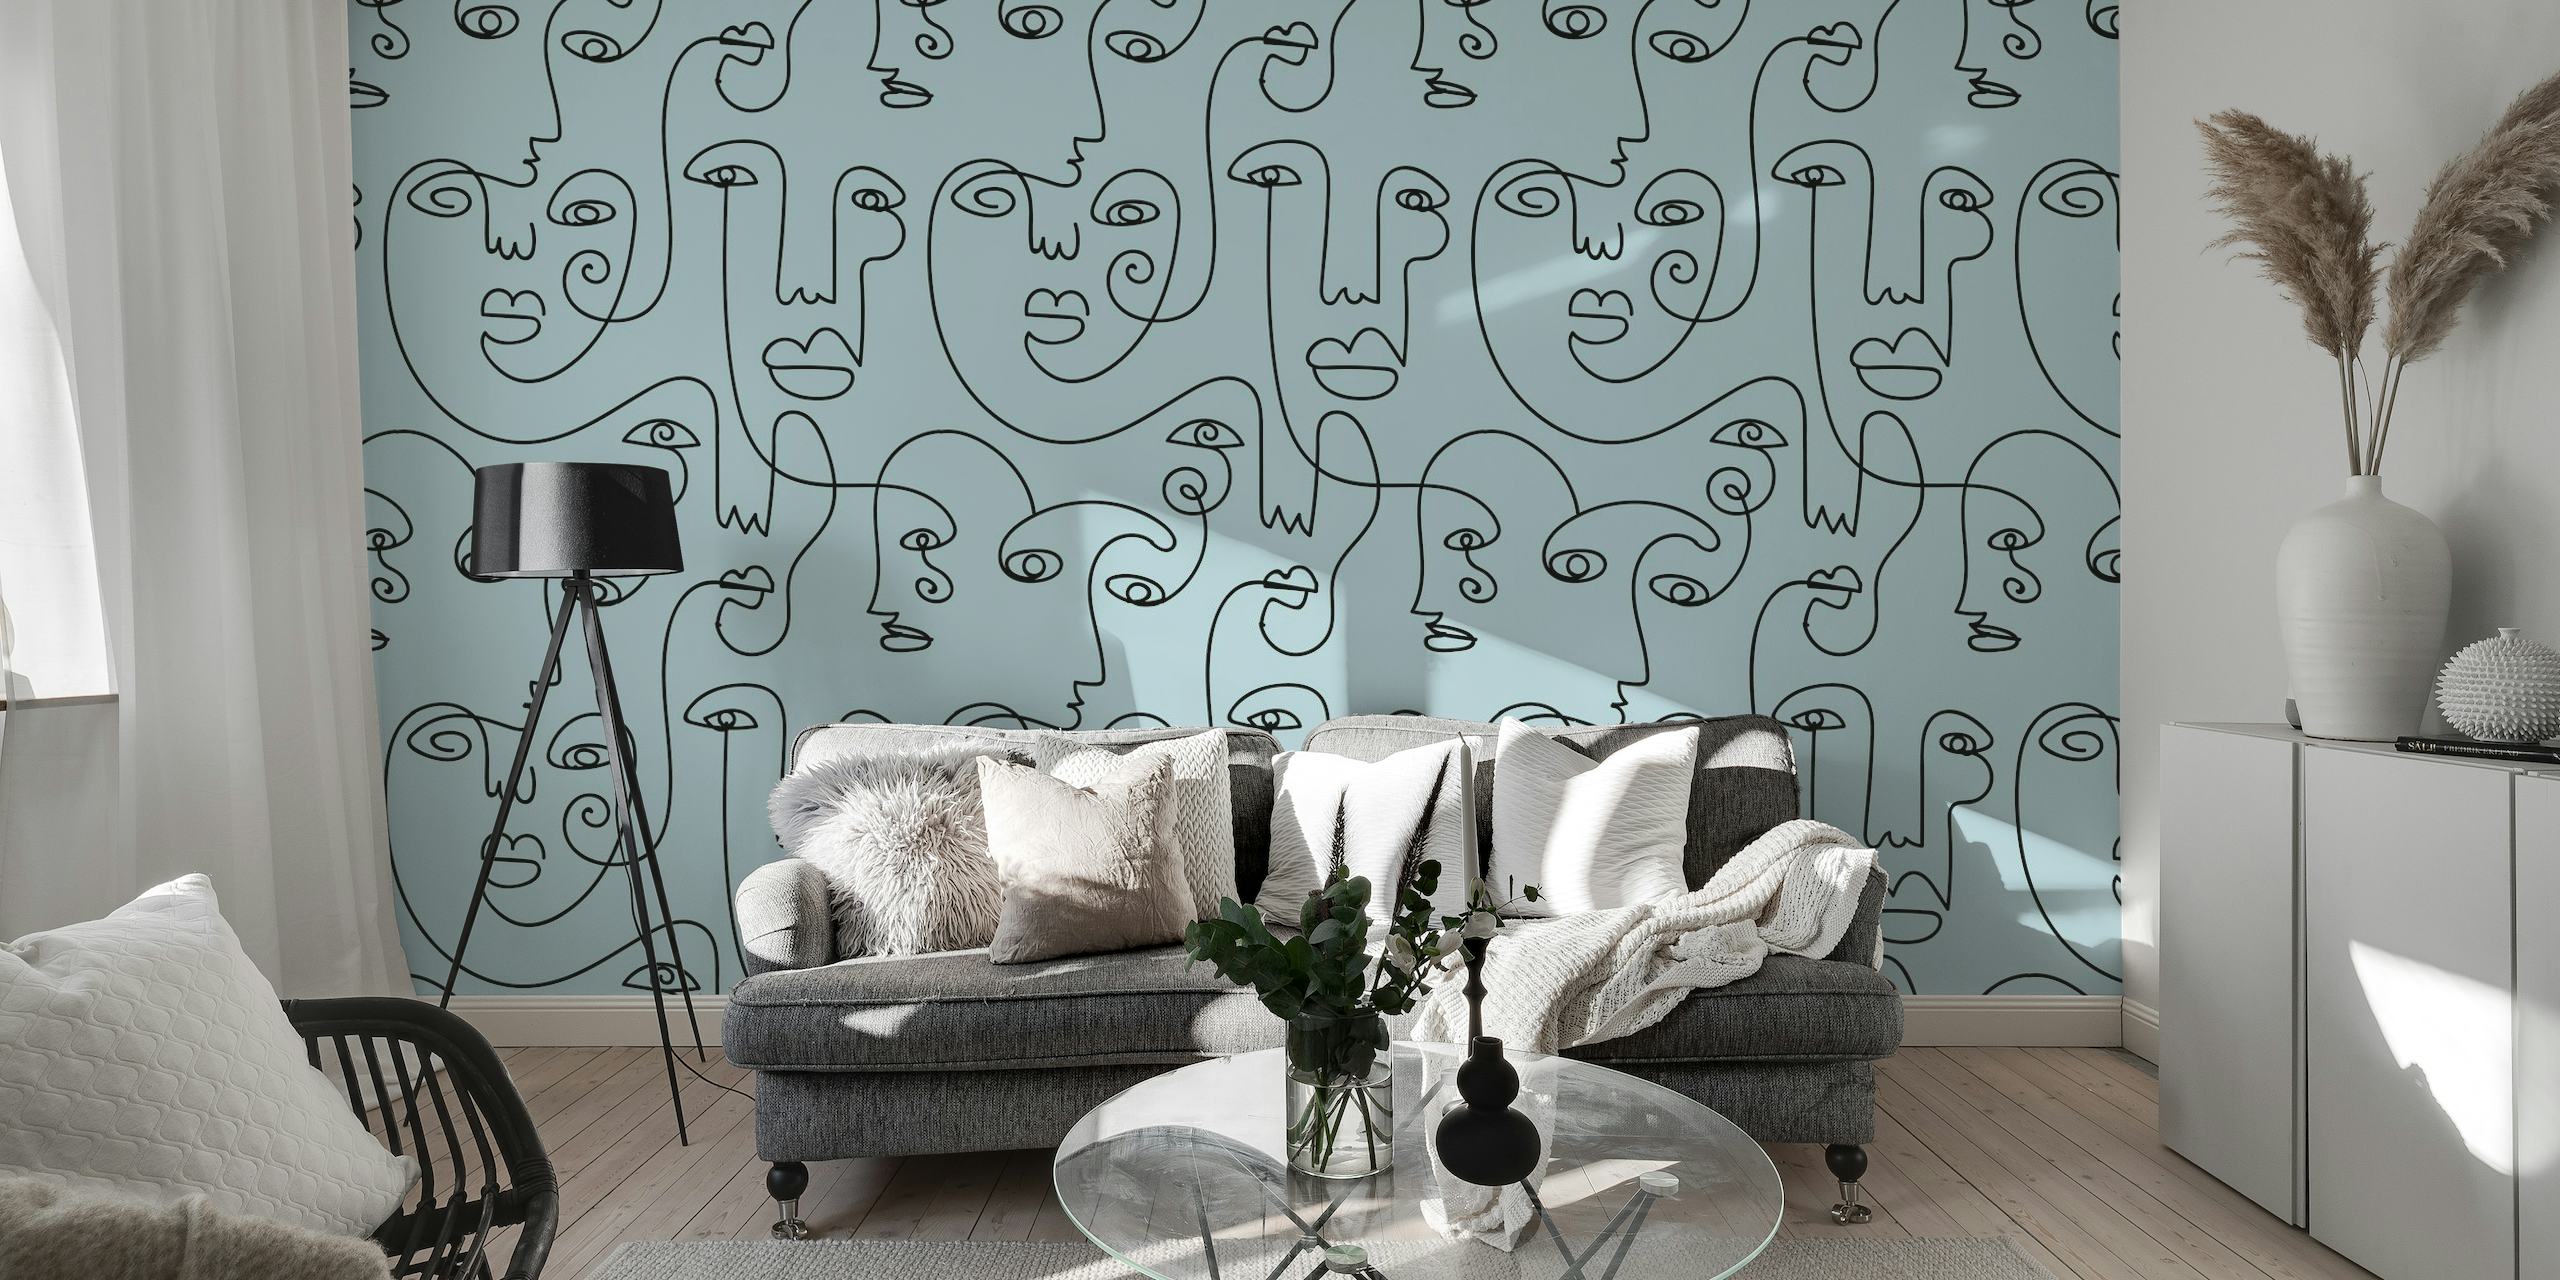 Abstract Picasso art-inspired blue gray wallpaper for modern room transformation